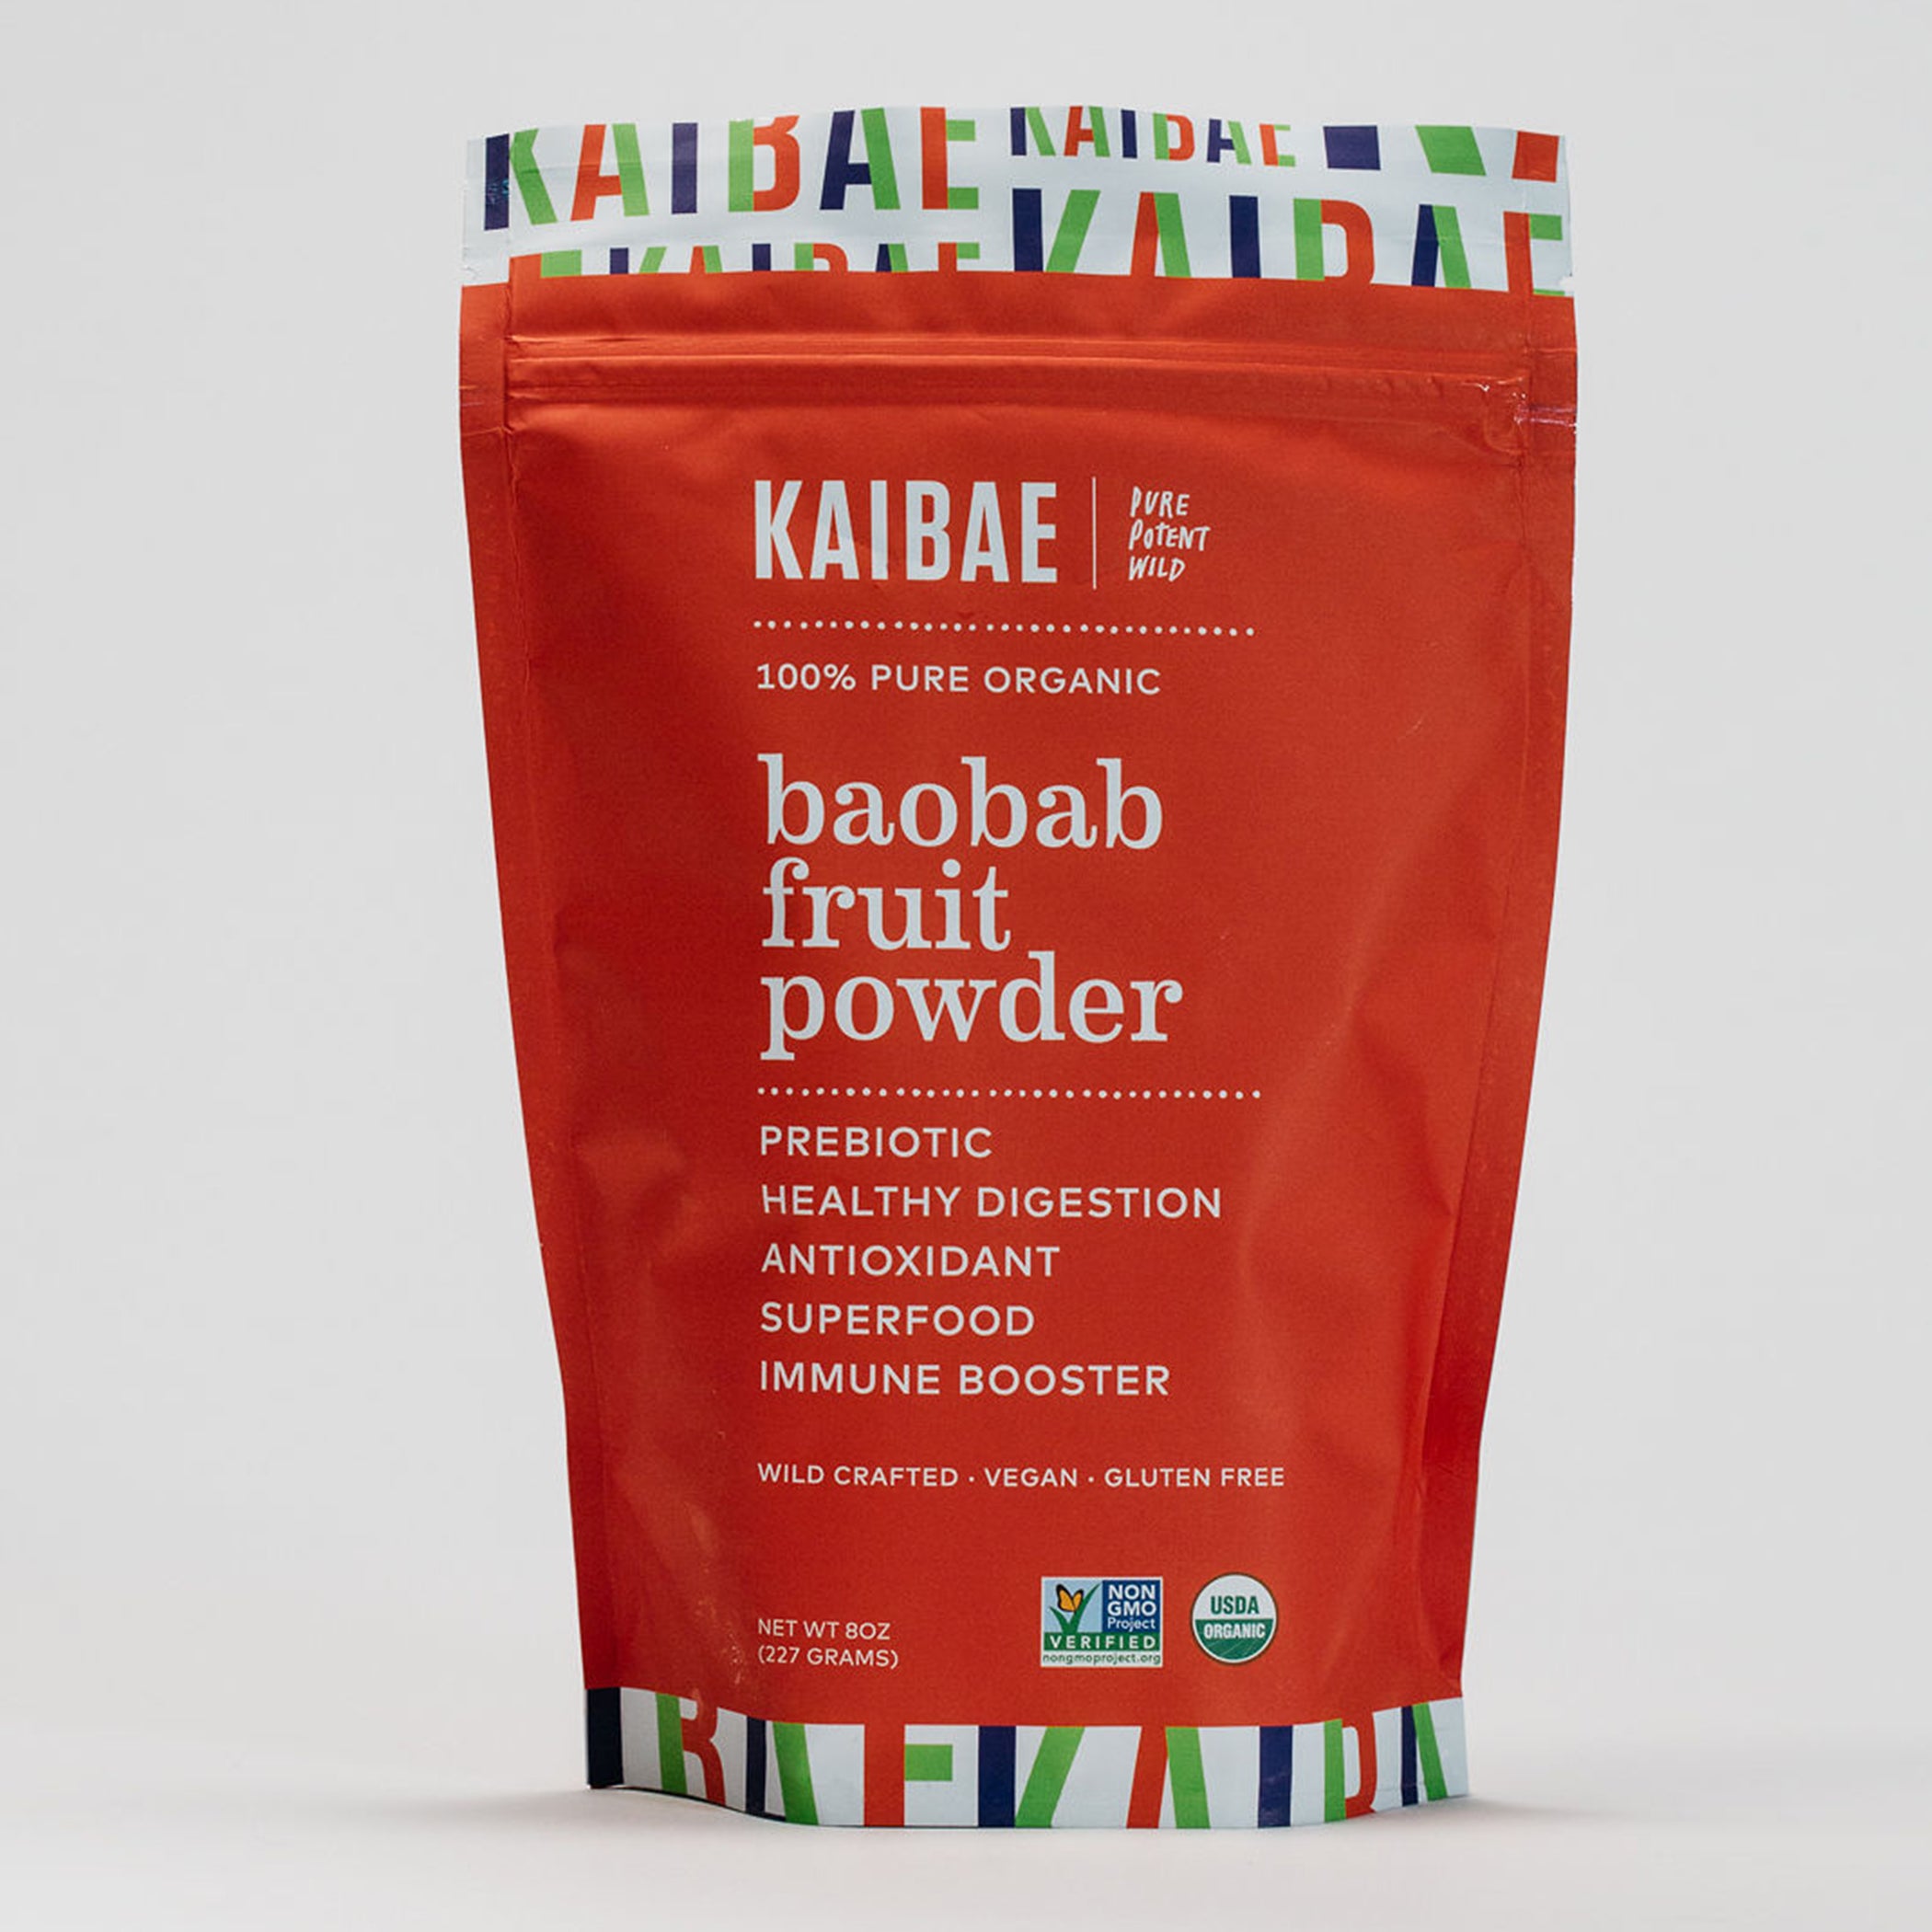 KAIBAE Baobab Powder in red pouch against a white background. 